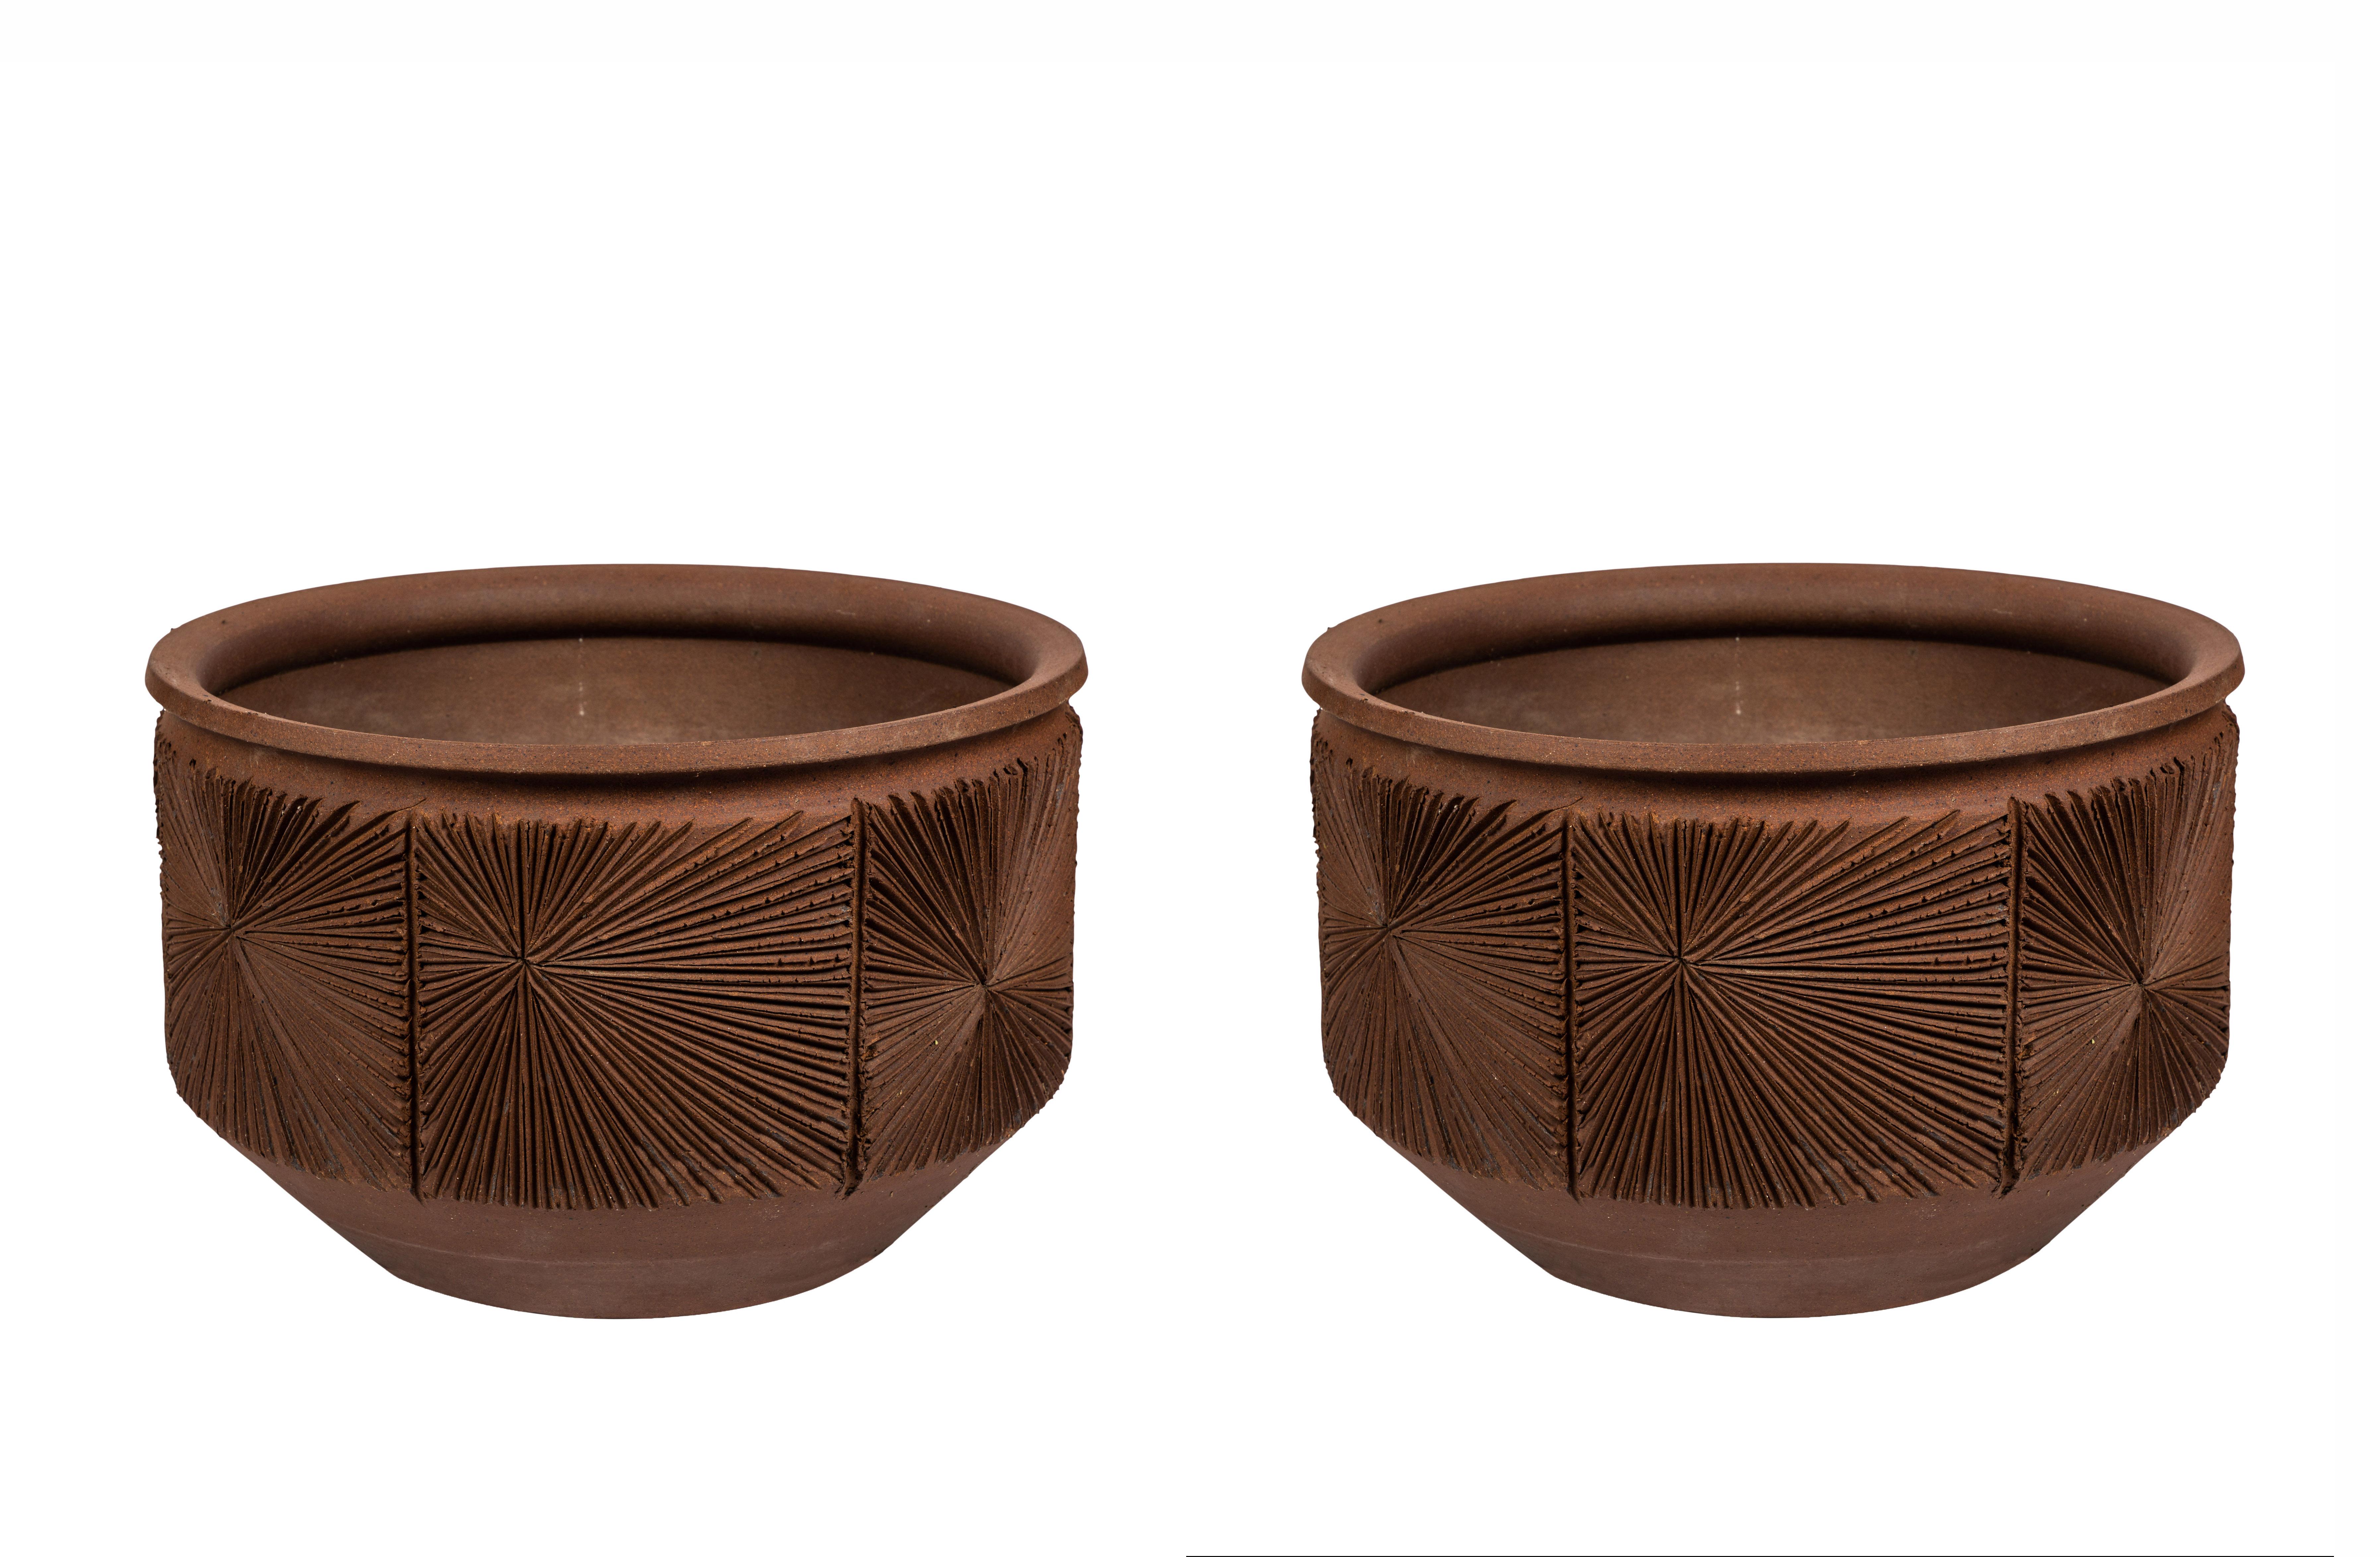 Monumental Robert Maxwell & David Cressey sunburst planter for Earthgender. Studio executed in hand etched textured earthenware. A very clean example from the short-lived and increasingly coveted design collective that only existed for a few